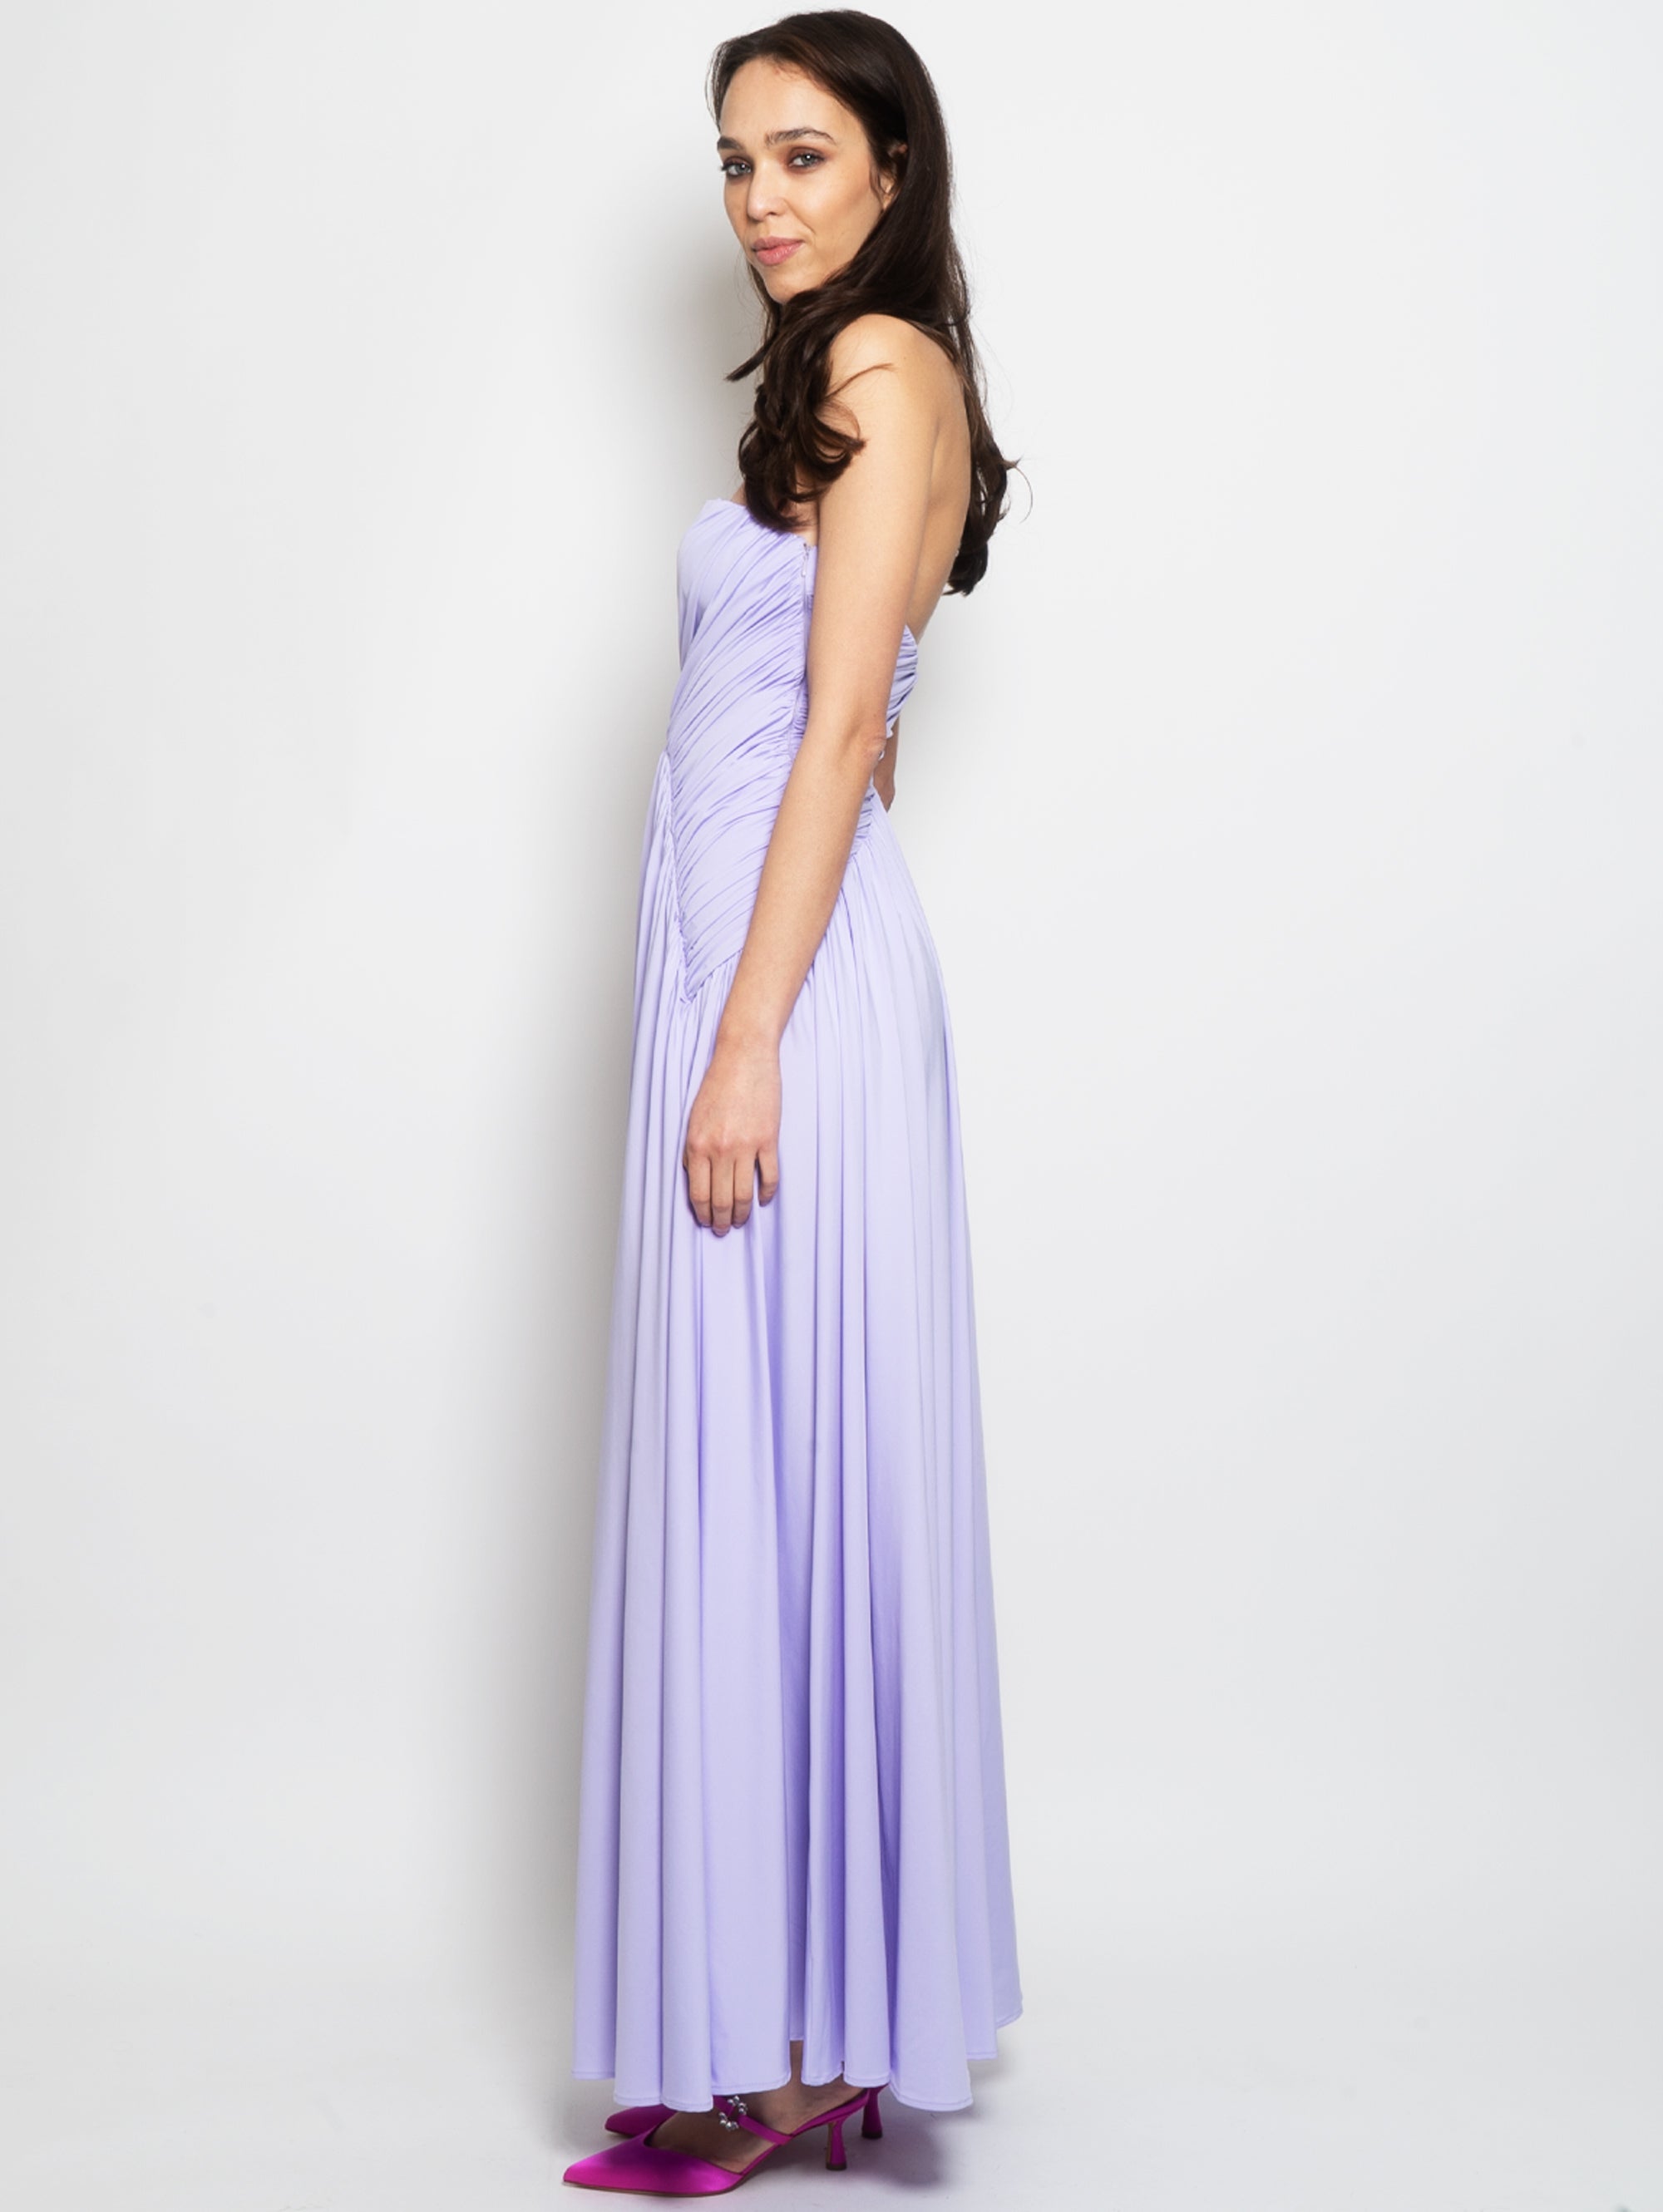 Long Dress with Lavender Gathered Bodice